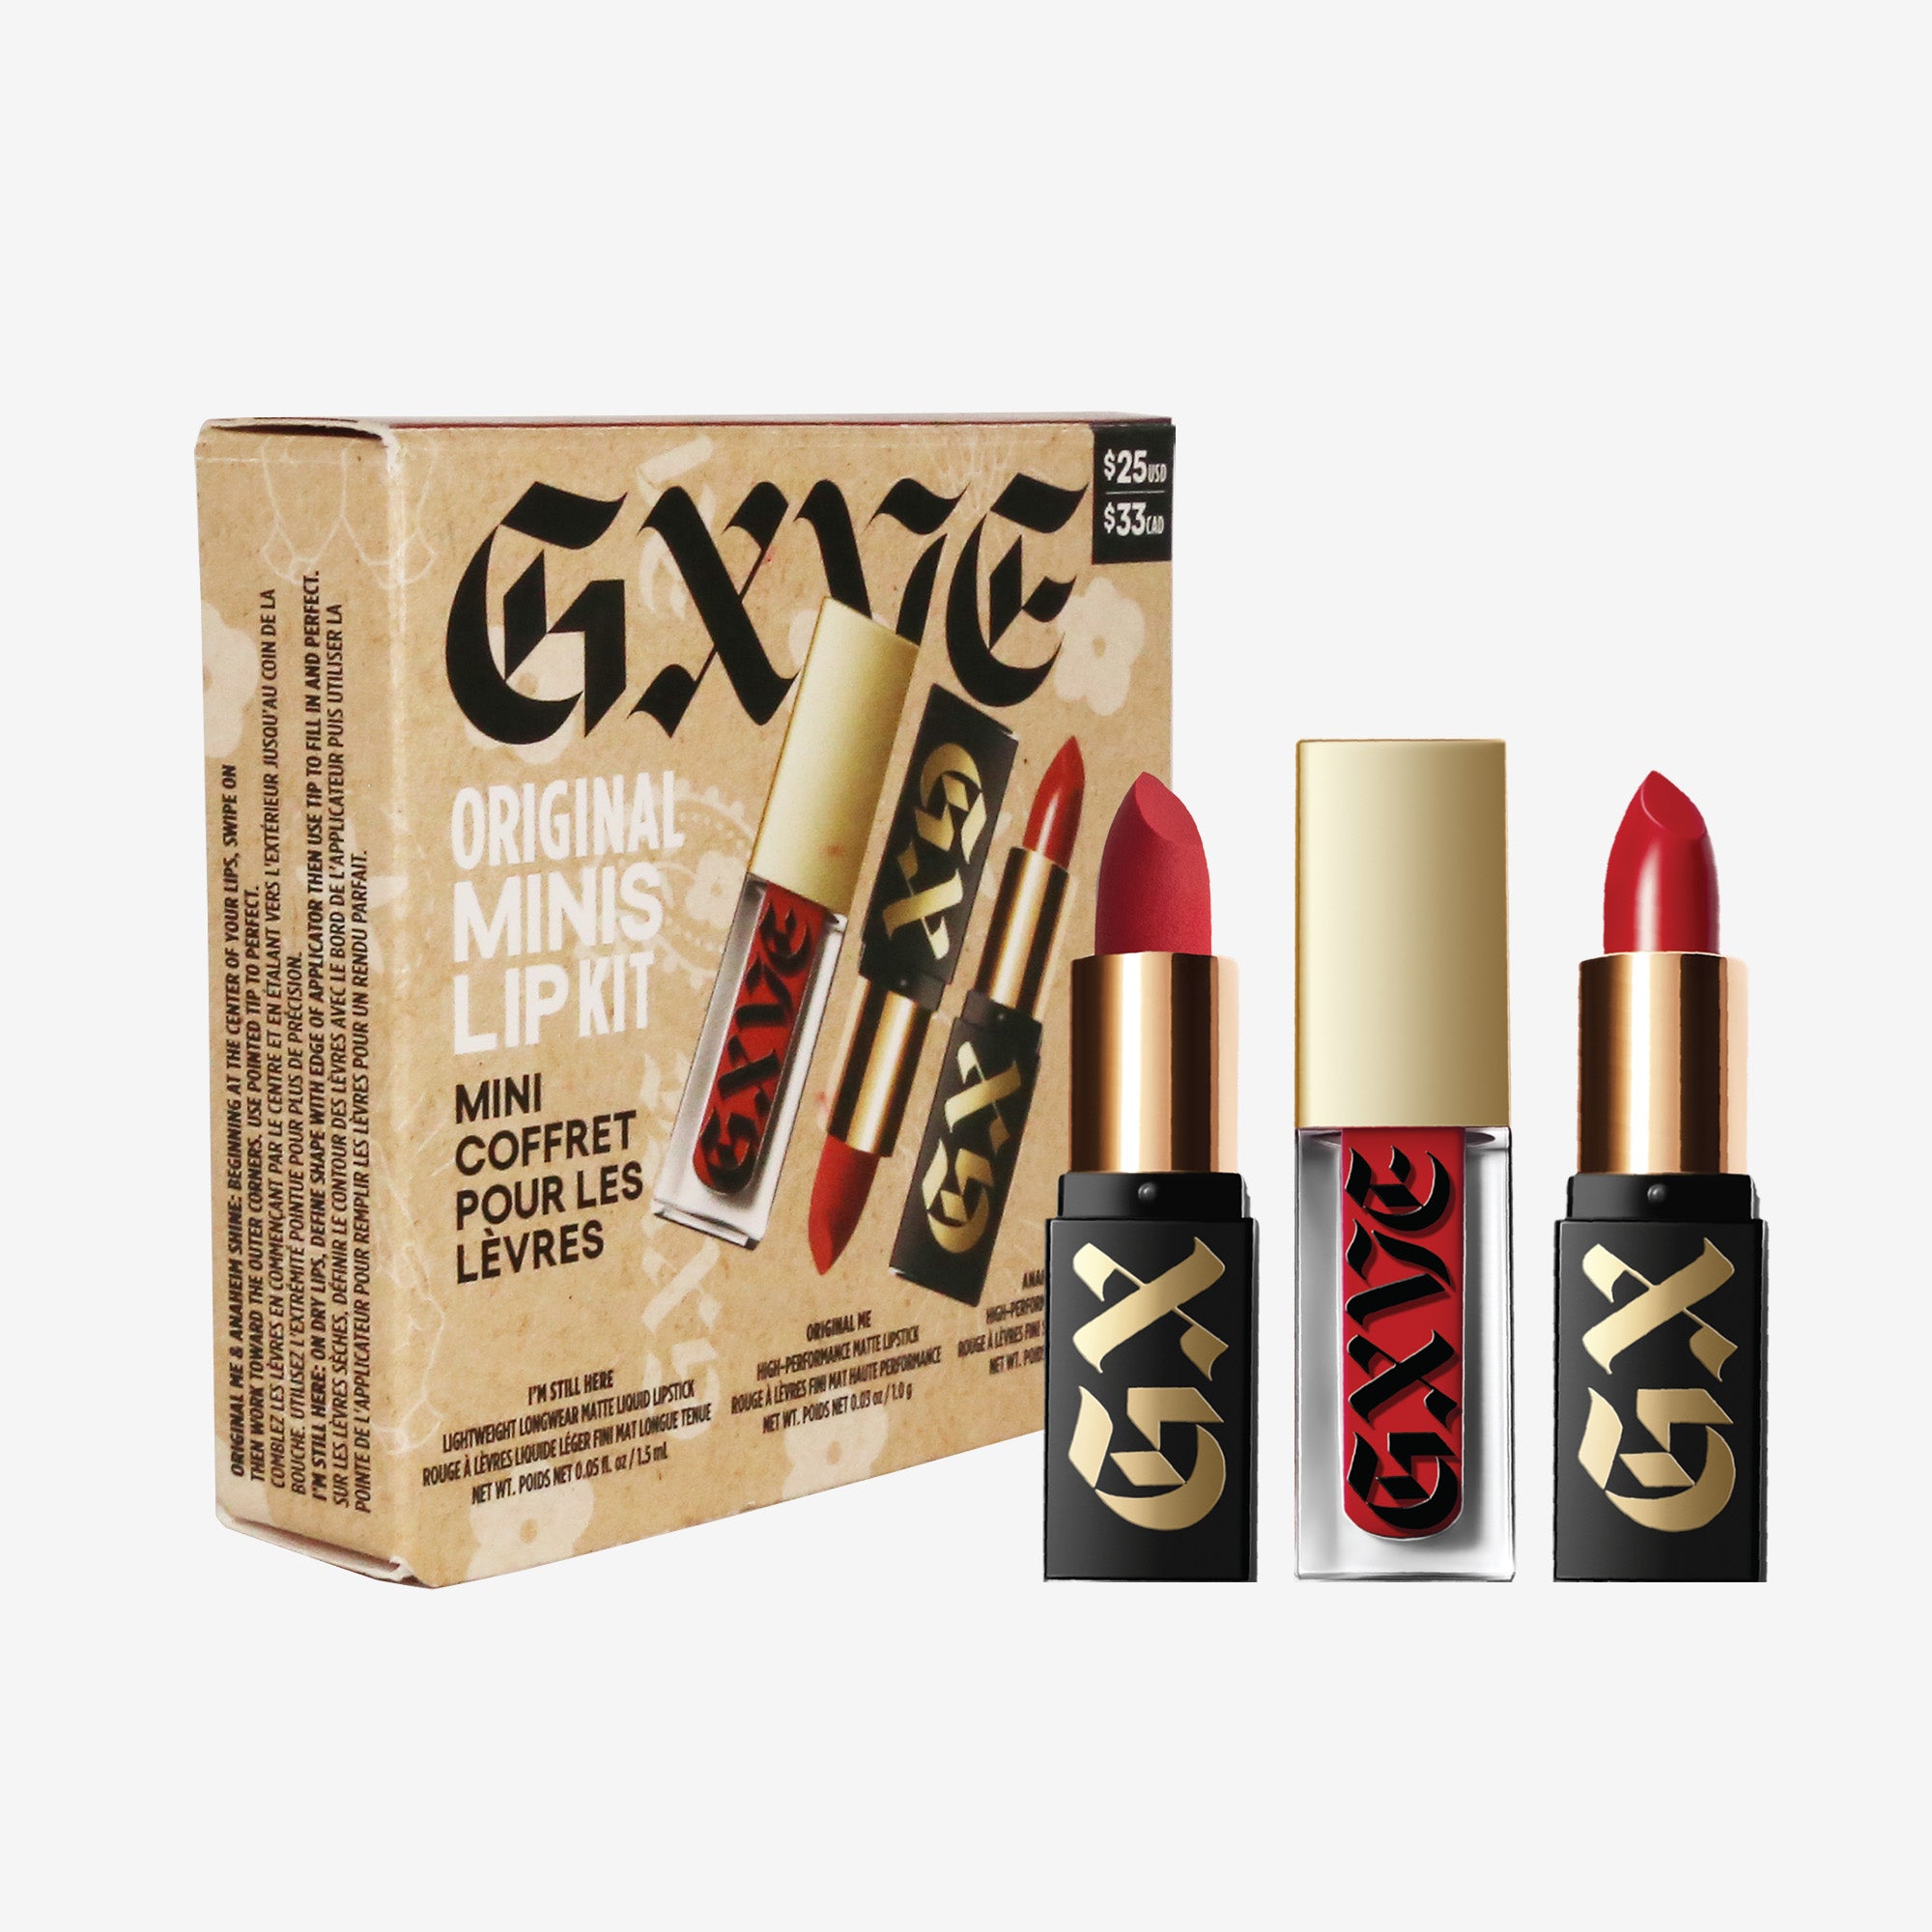 Selected: Original Minis Lip Set Original Recipe Discover your perfect red lip with this limited-edition mini set featuring Gwen's signature, bestselling shade 